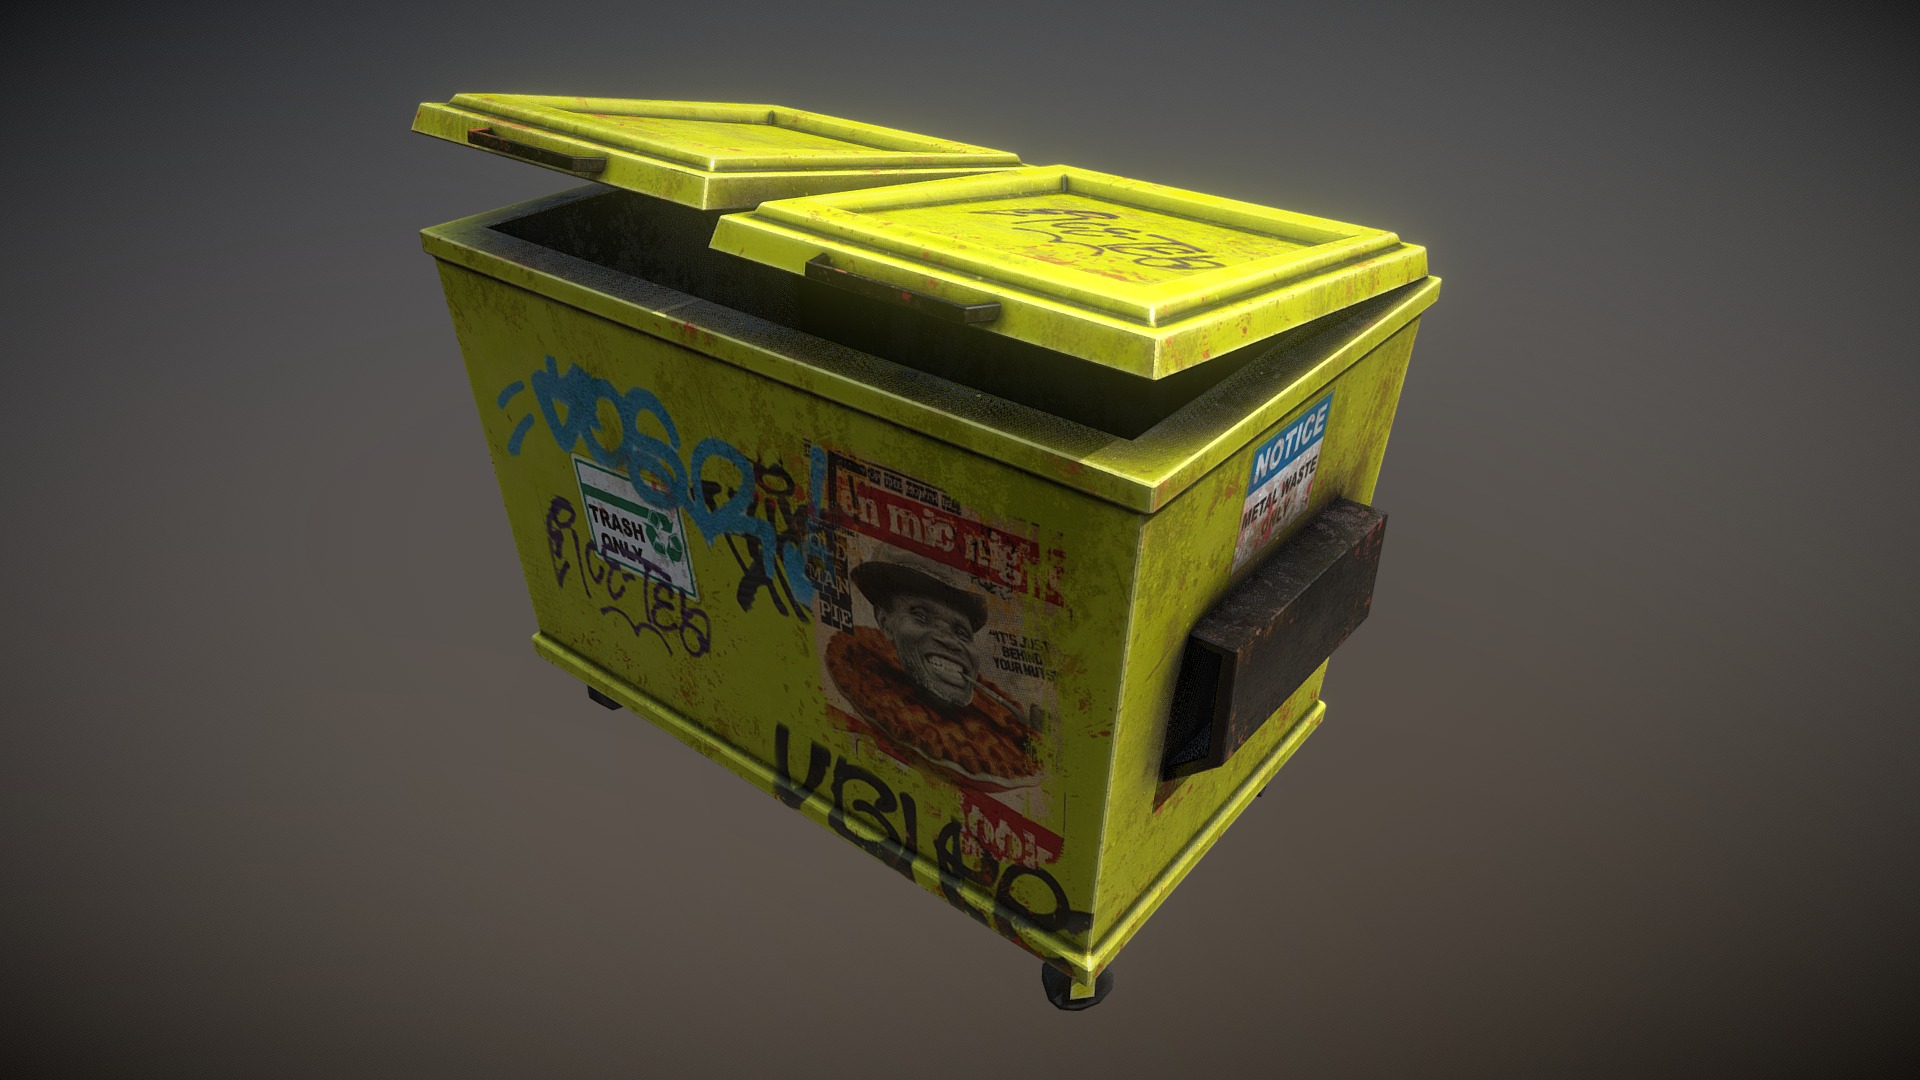 3D model Dumpster - This is a 3D model of the Dumpster. The 3D model is about a box with a graphic design on it.